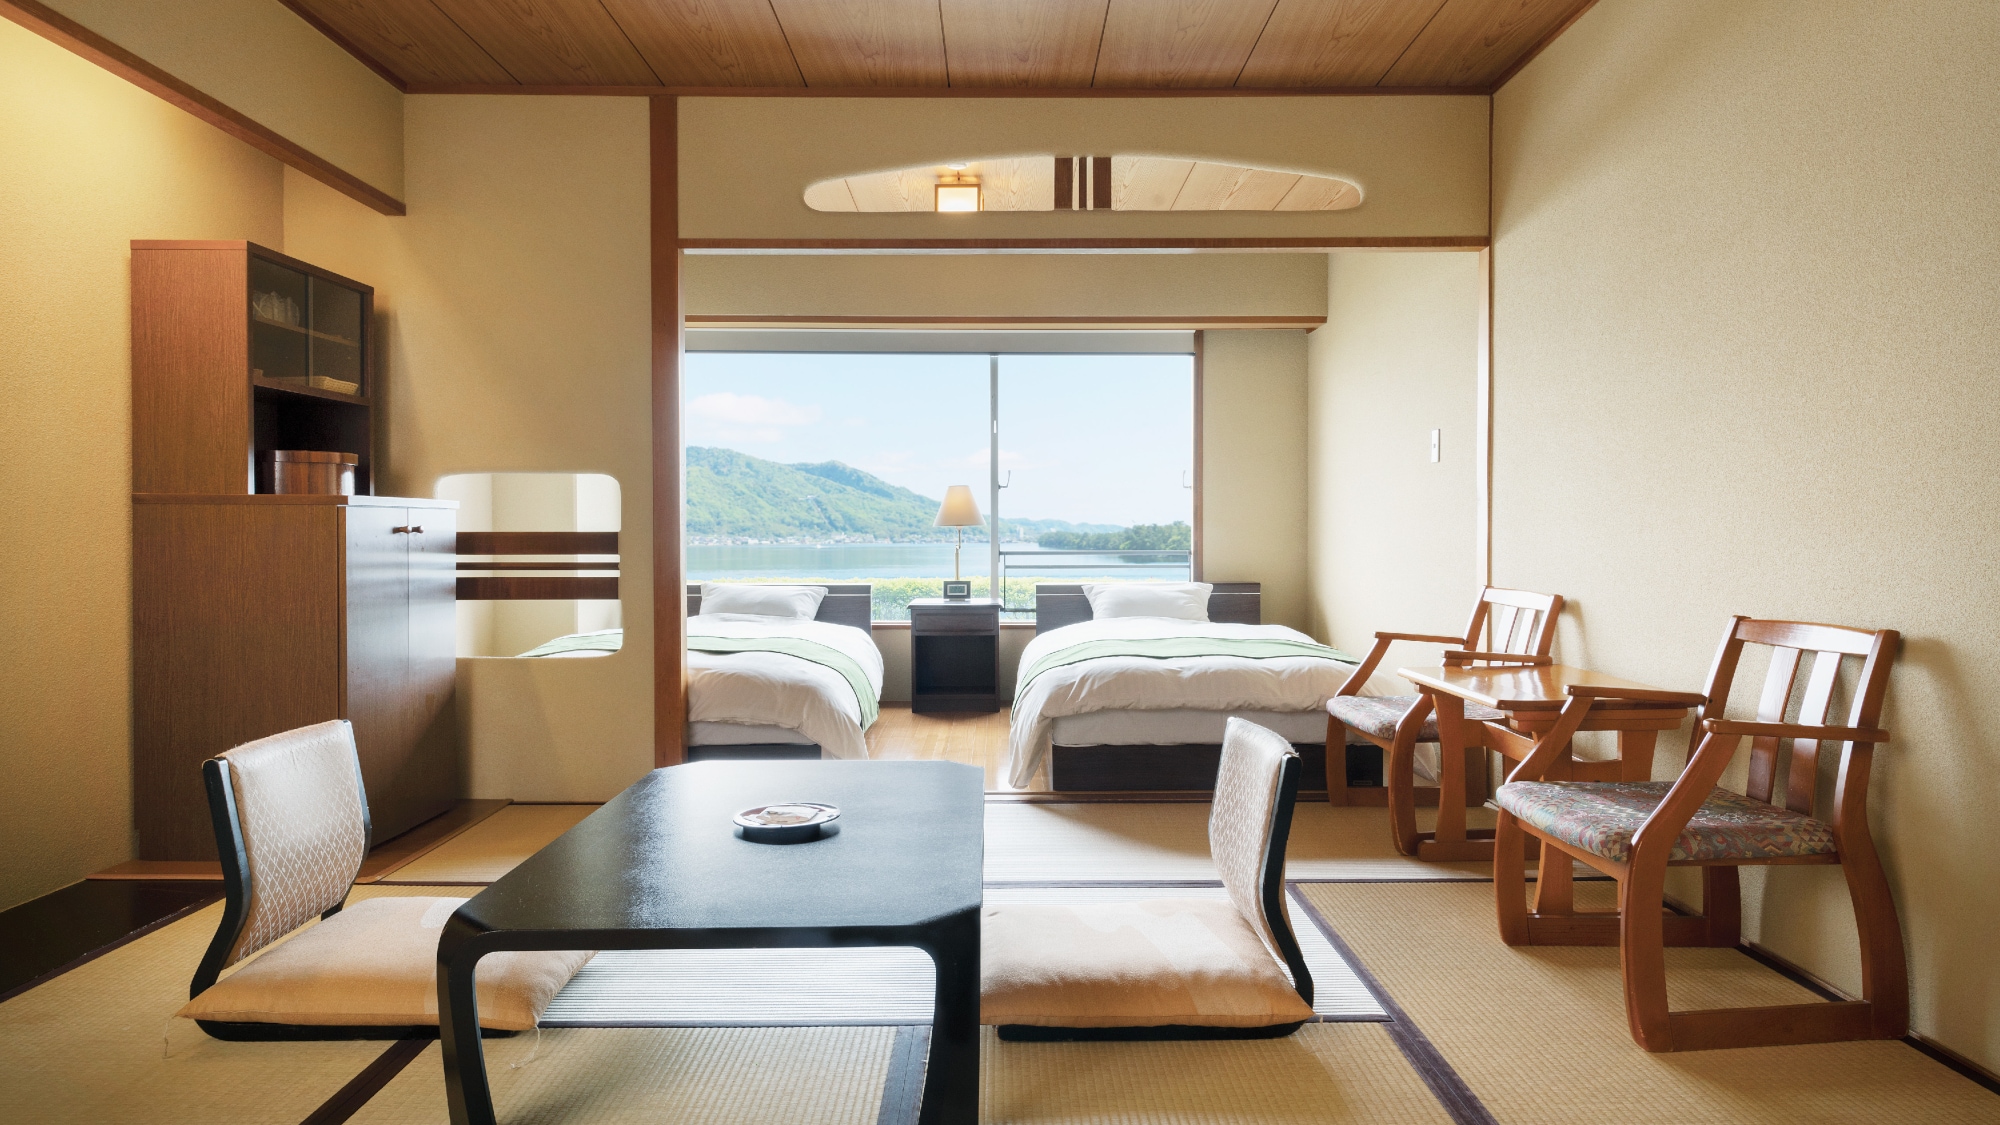 An example of a Japanese-Western room (ocean view)